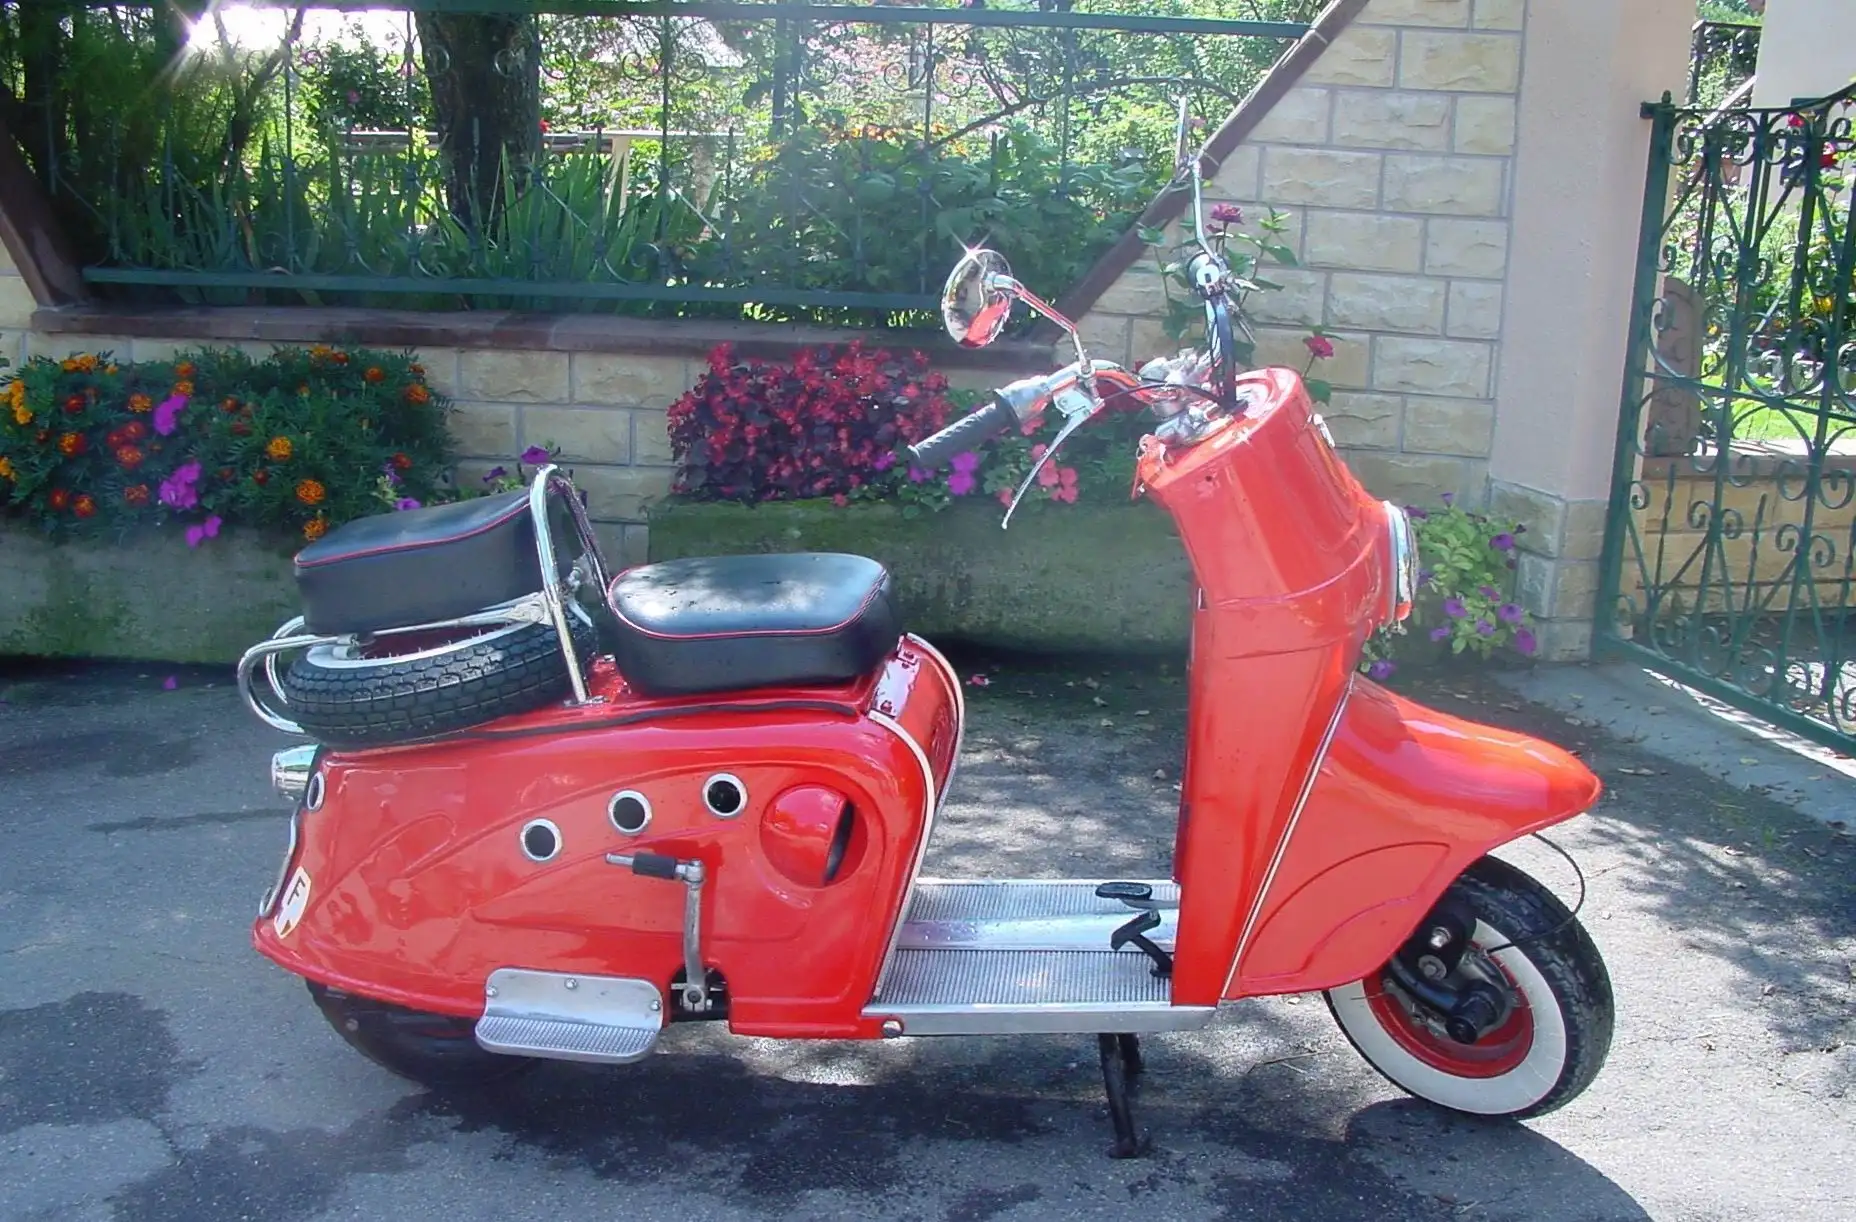 The Classic Charm of the Bernardet Scooter